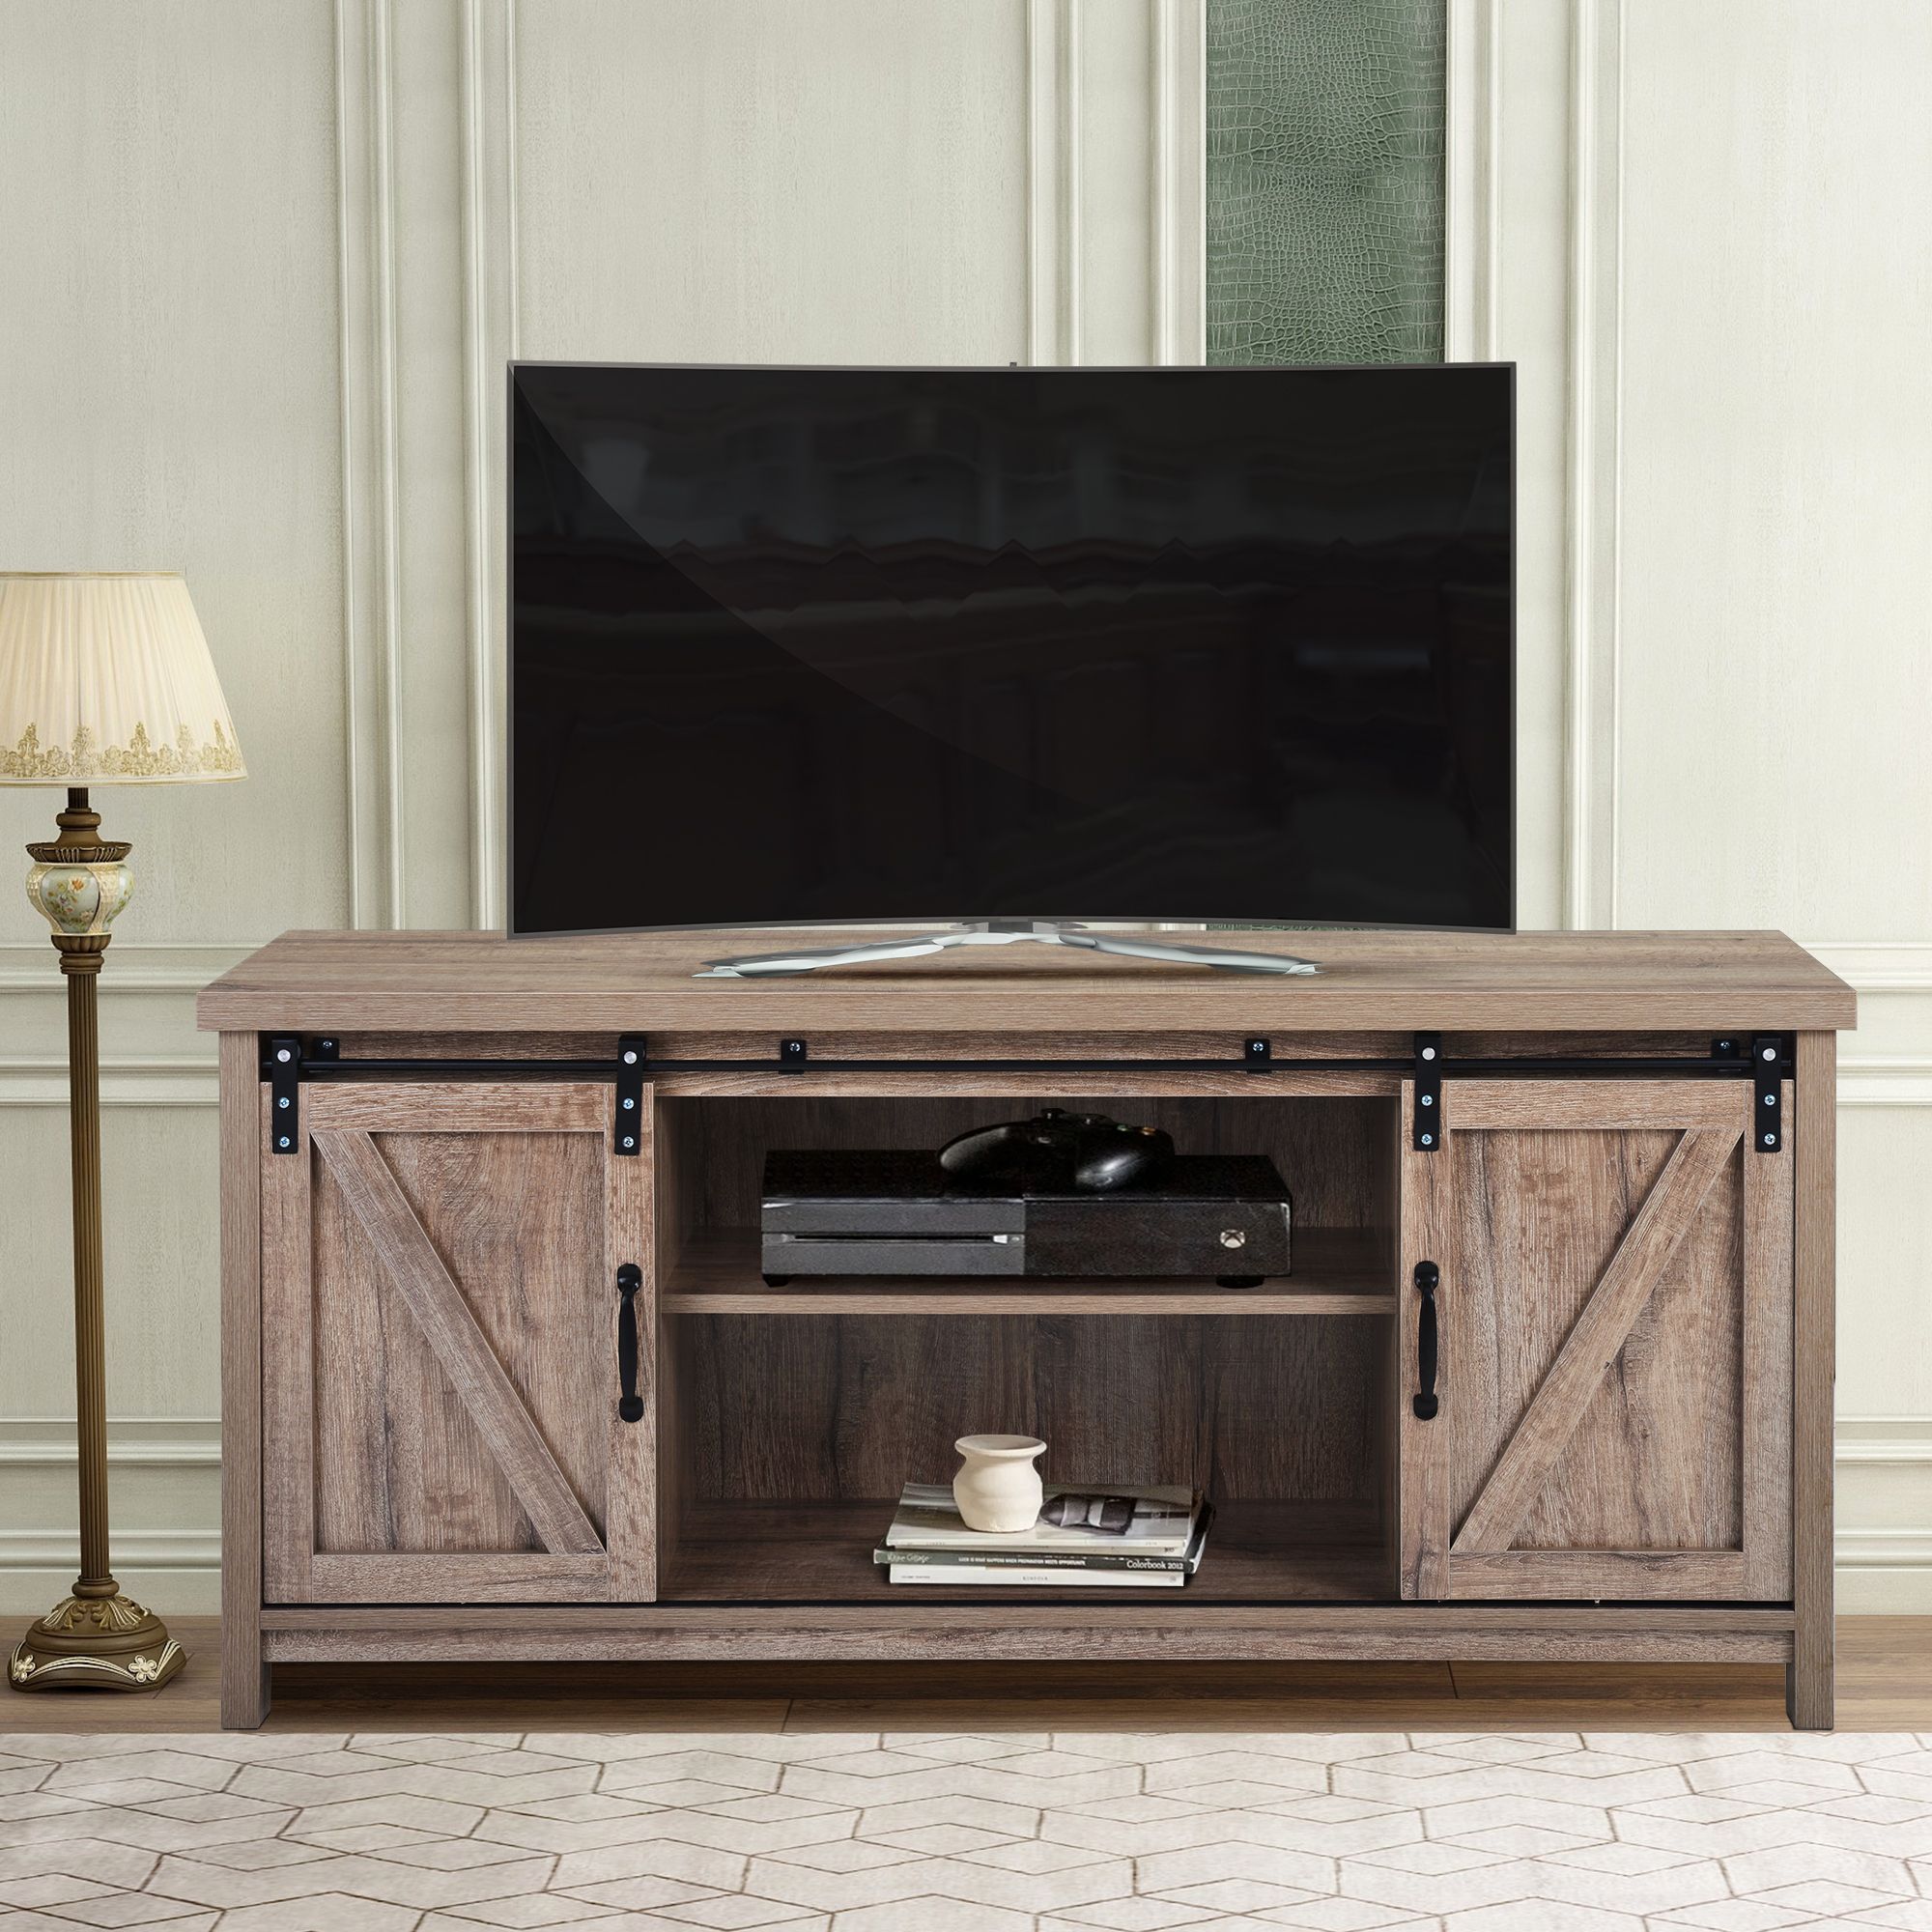 Wood Tv Stand, Modern Corner Tv Table Stands, Rustic Style With Contemporary Corner Tv Stands (View 10 of 15)